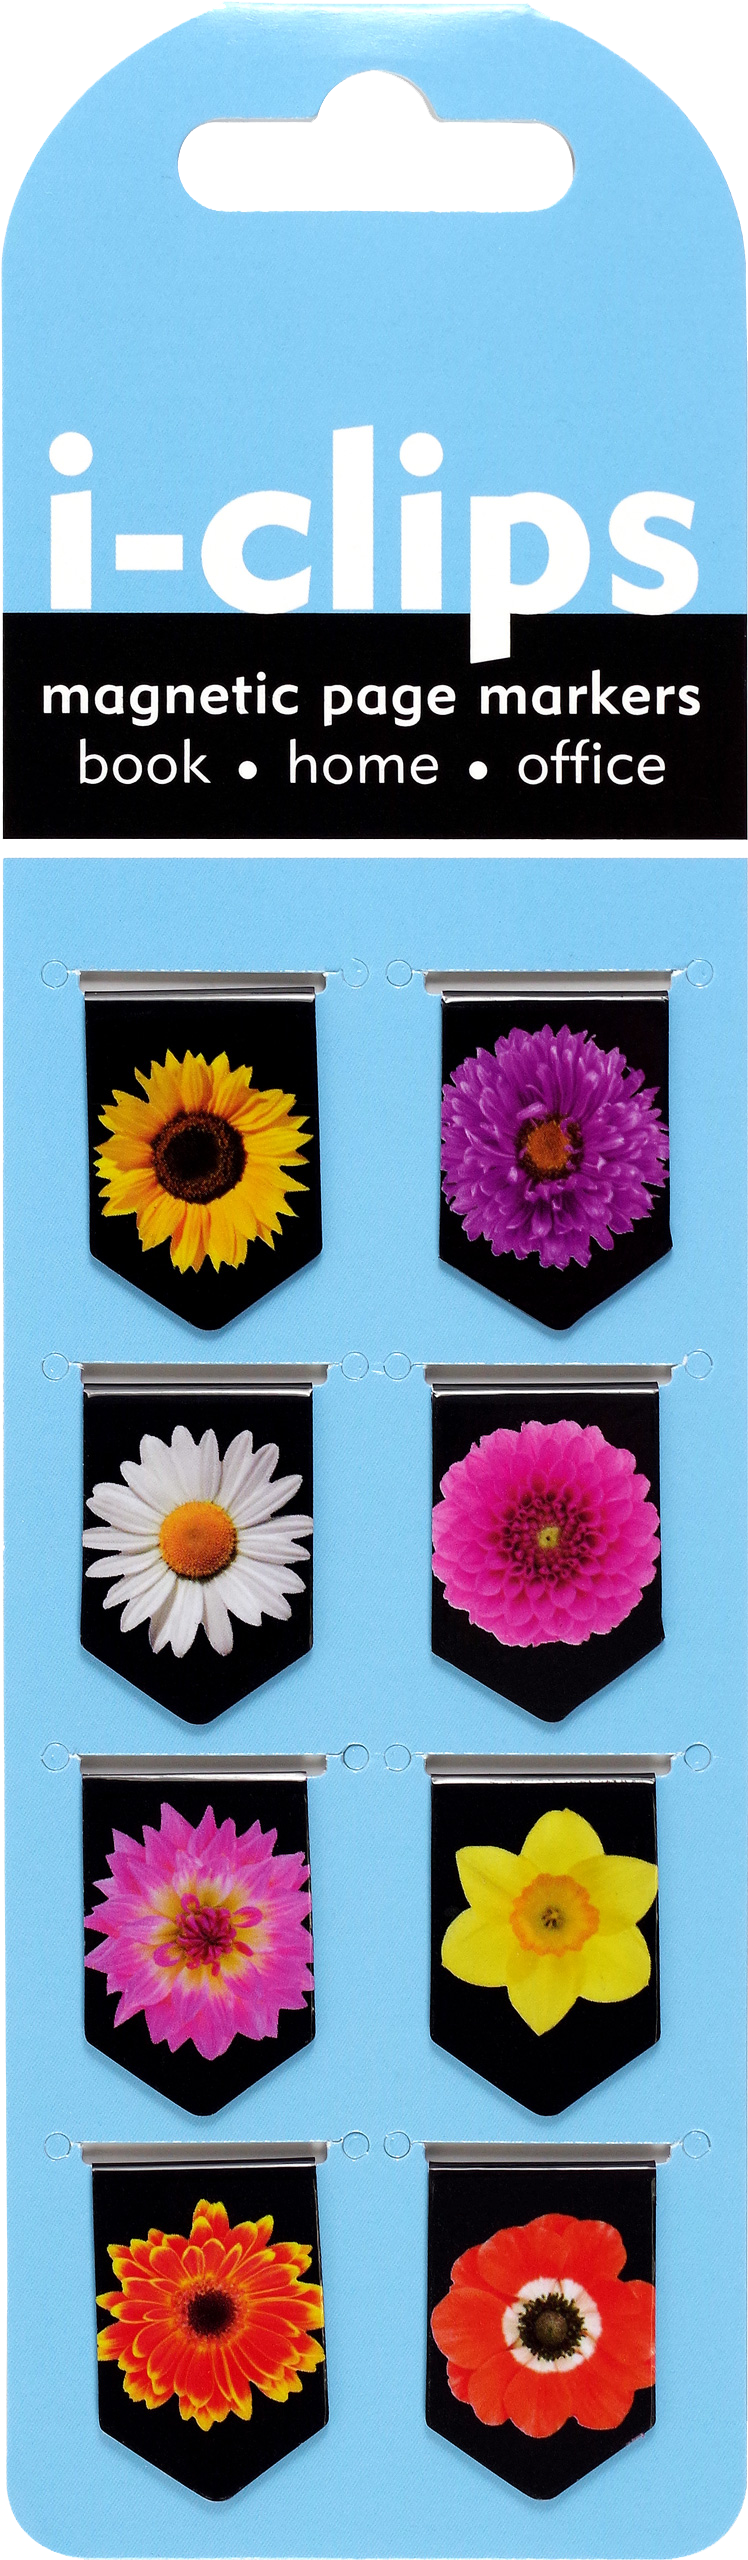 Flowers i-clips Magnetic Page Markers